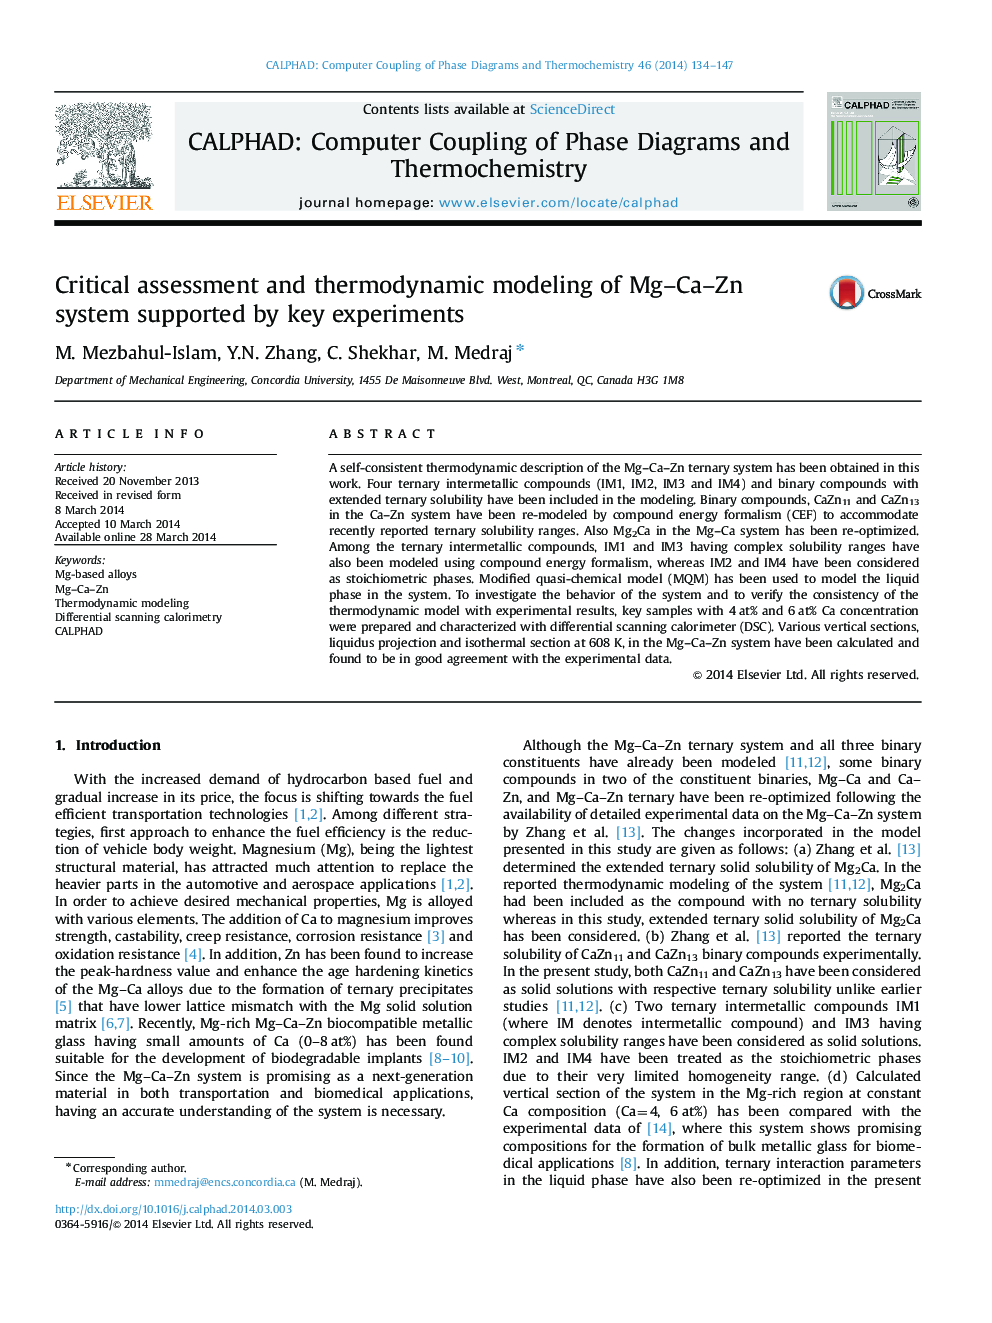 Critical assessment and thermodynamic modeling of Mg-Ca-Zn system supported by key experiments